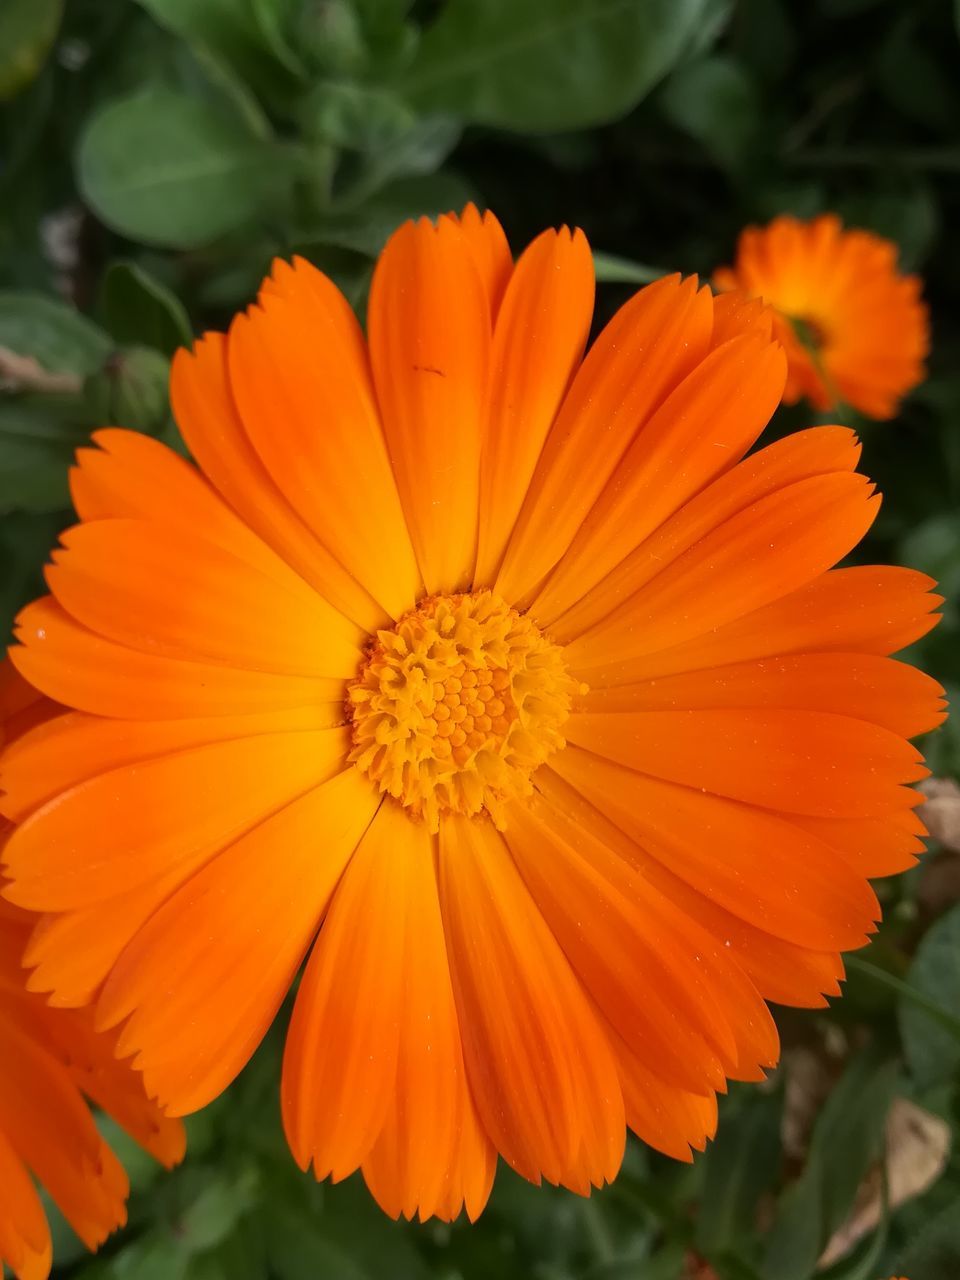 flowering plant, flower, petal, flower head, inflorescence, fragility, vulnerability, freshness, plant, beauty in nature, orange color, close-up, growth, pollen, focus on foreground, nature, yellow, day, no people, gazania, orange